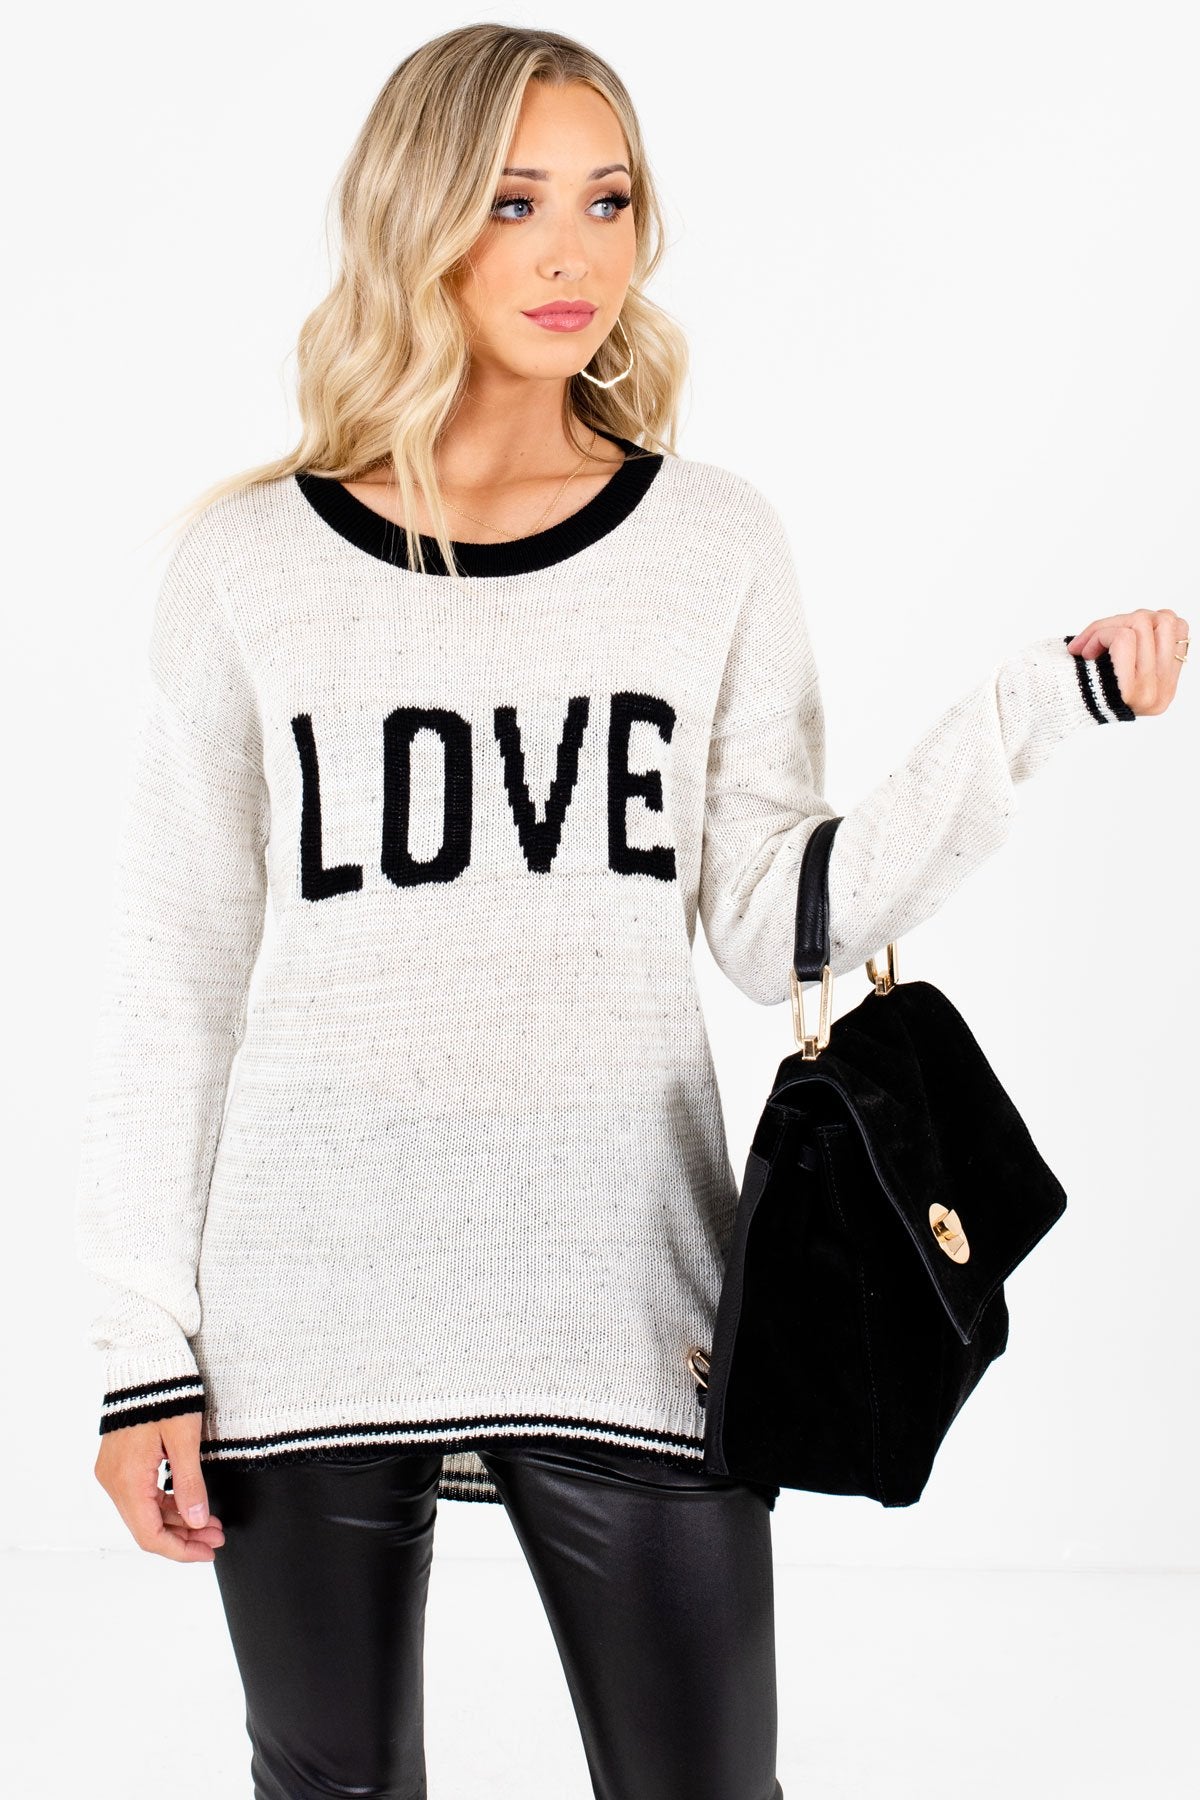 Women's Cream and Black Speckled Material Boutique Sweater